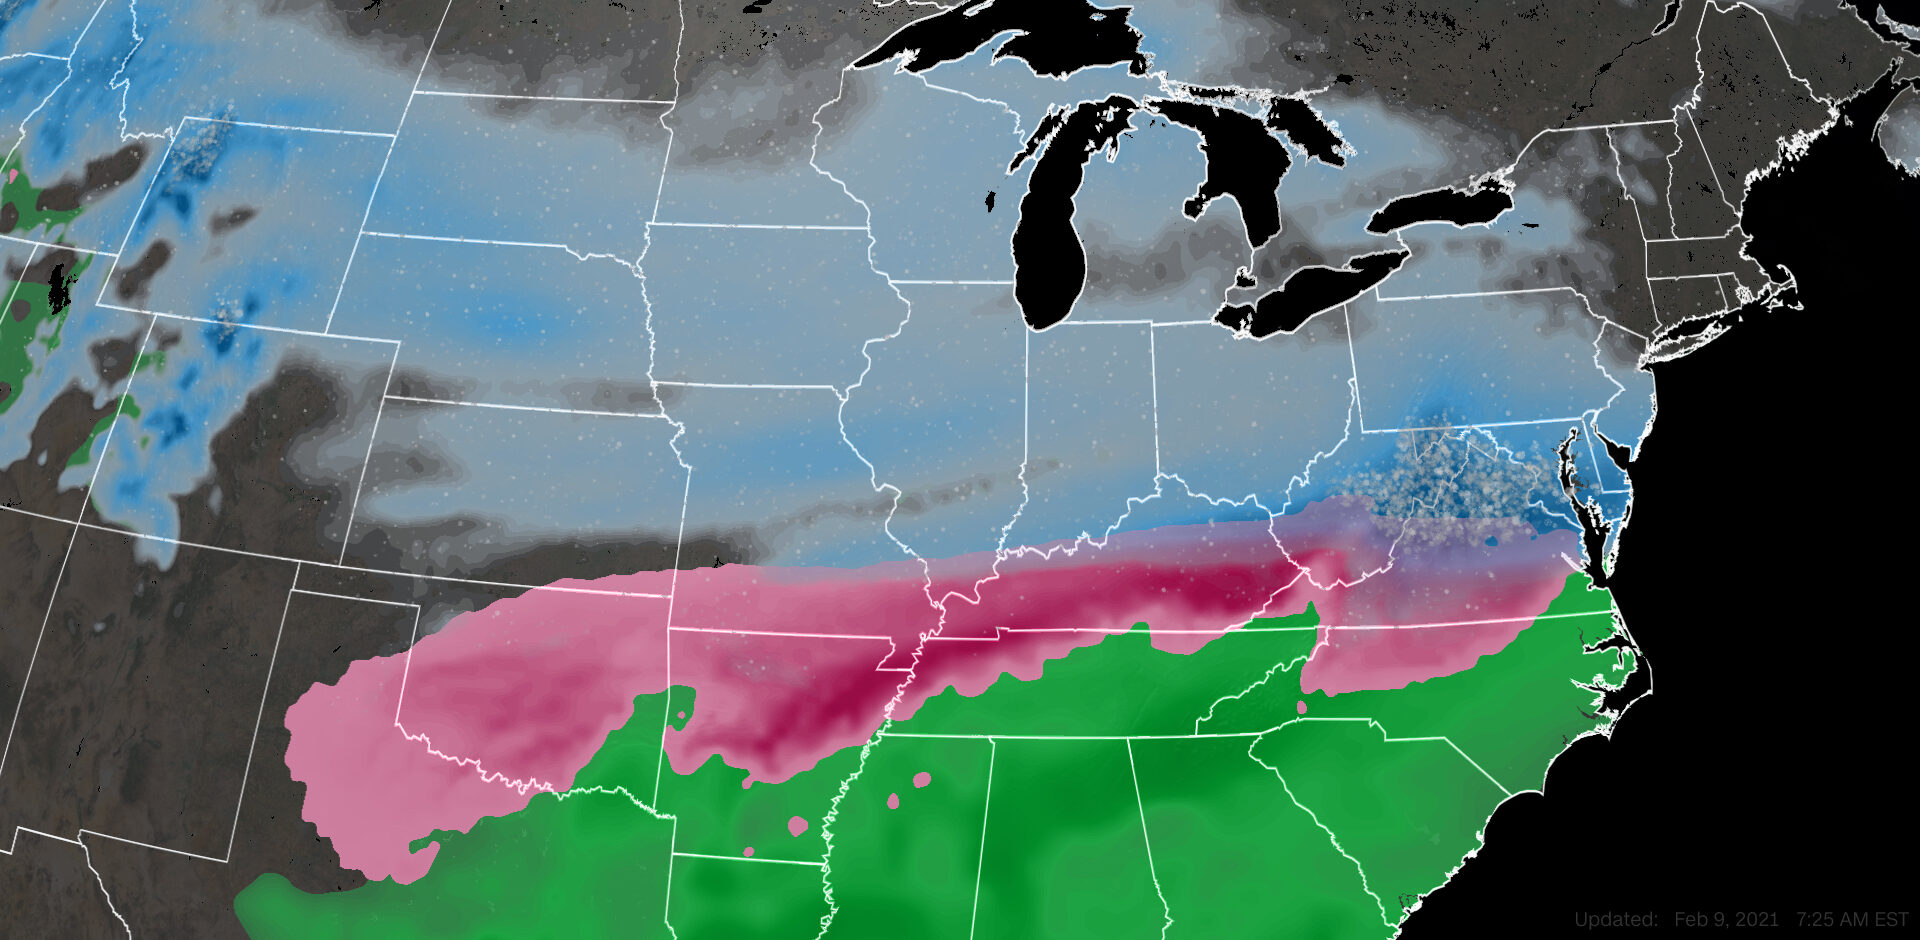 Polar Vortex Is Setting the Stage for a Crippling Ice Storm